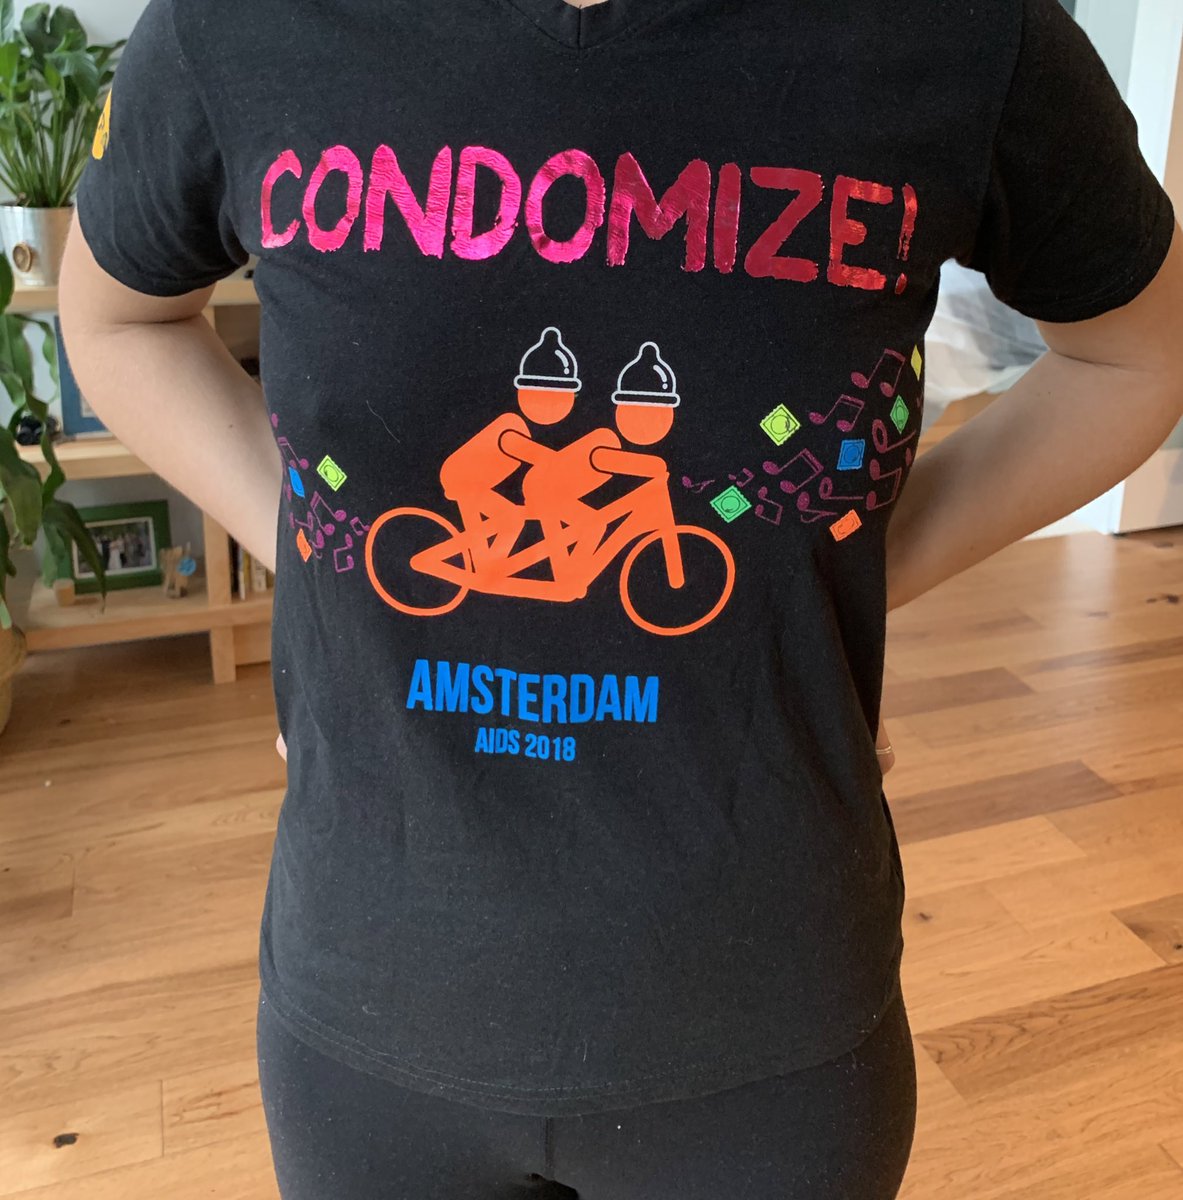 Today is World AIDS Day and I donned my Condomize t-shirt gifted to me from my dear friend and collaborator who is living with HIV. ♥️ And yes, the cyclists have condoms on their heads 🍆 #WorldAIDSDay #UEqualsU #WorldAidsDay2021 #HIVAwareness #WomenAndHIV